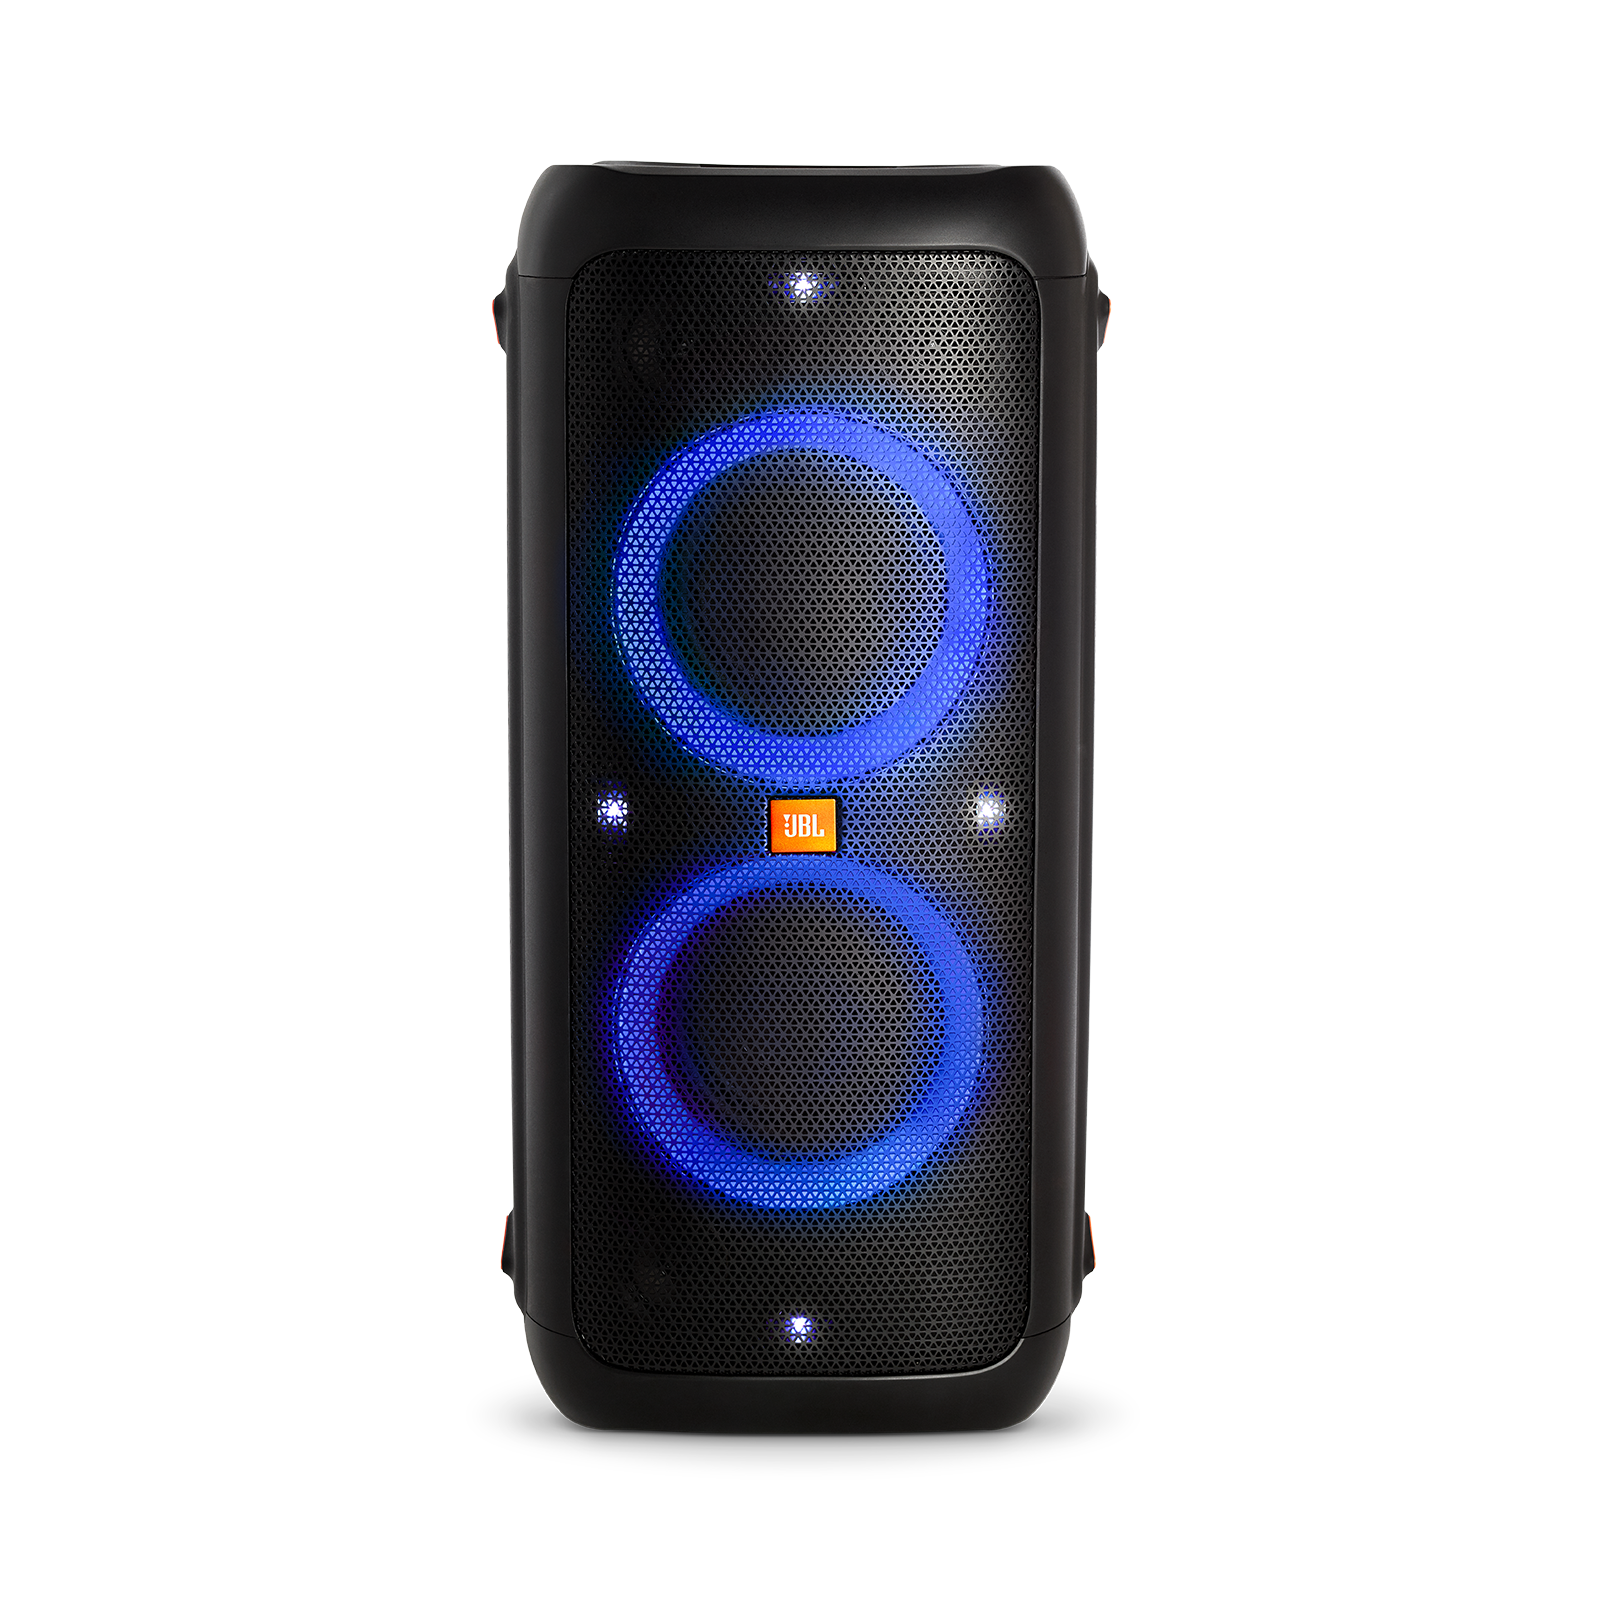 JBL PartyBox 300 - Black - Battery-powered portable Bluetooth party speaker with light effects - Detailshot 1